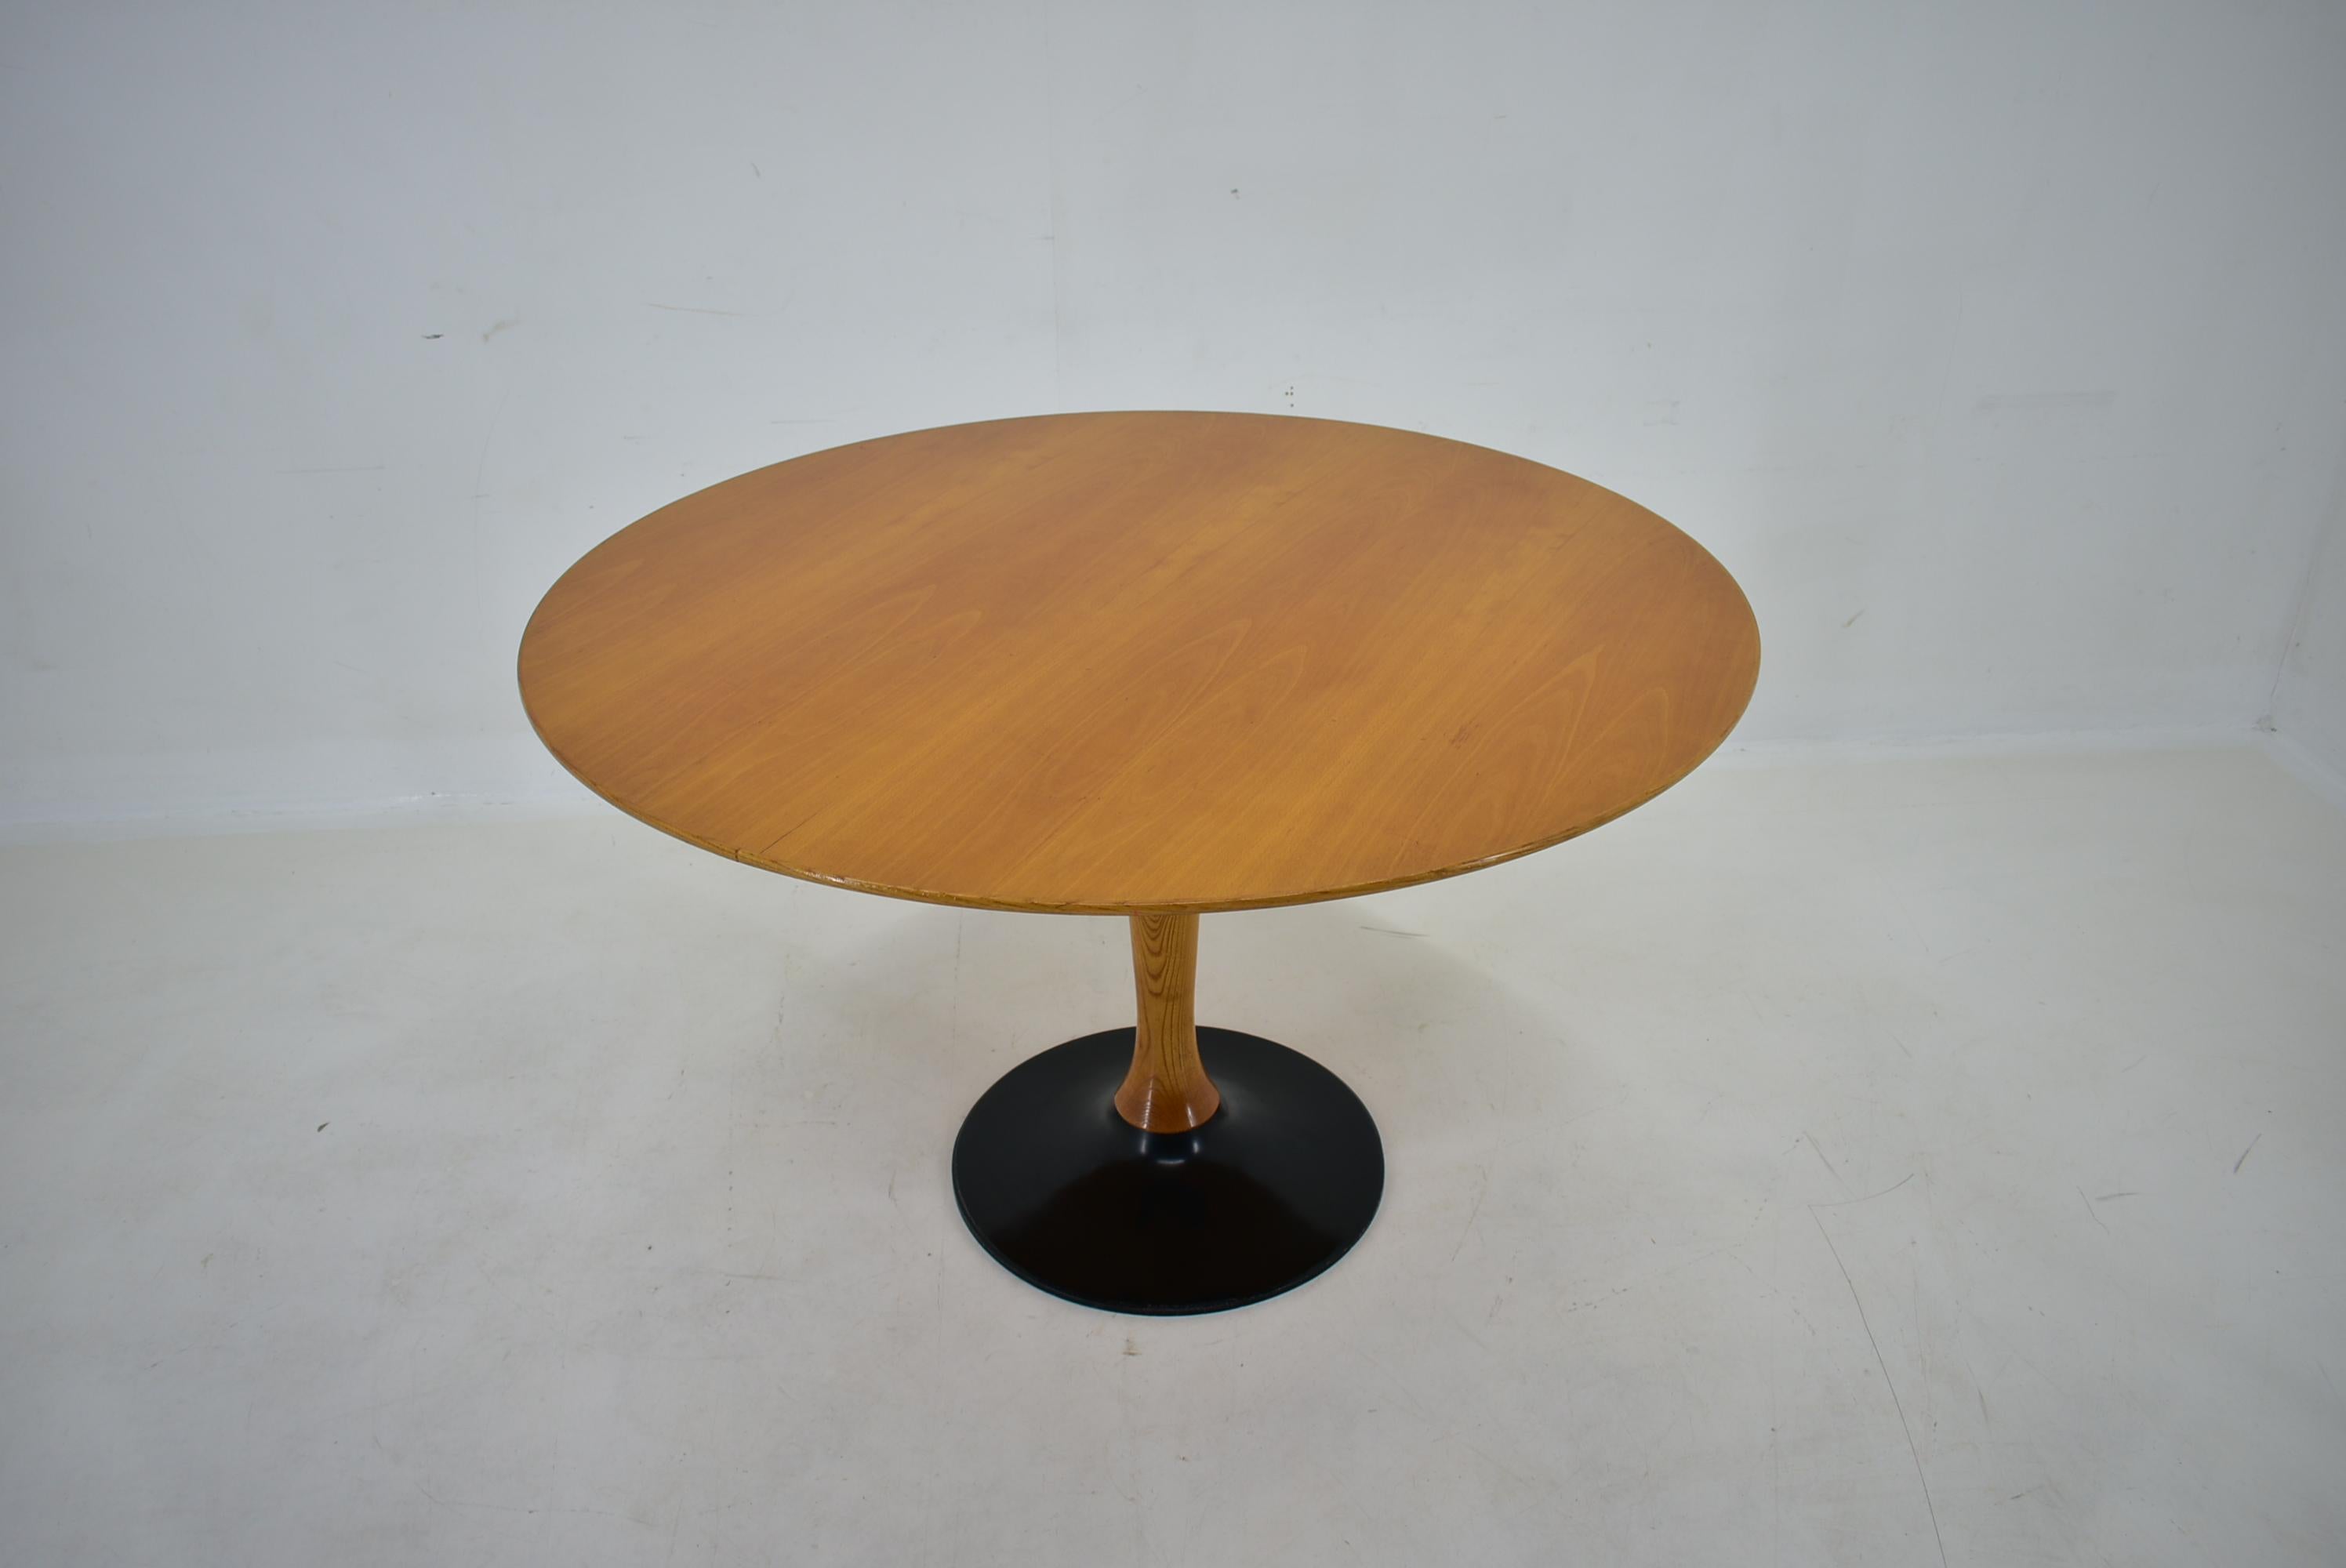 - Made in Czechoslovakia
- Made of beech, veneer, cast iron
- The table is Stabil
- Cleaned
- good original condition